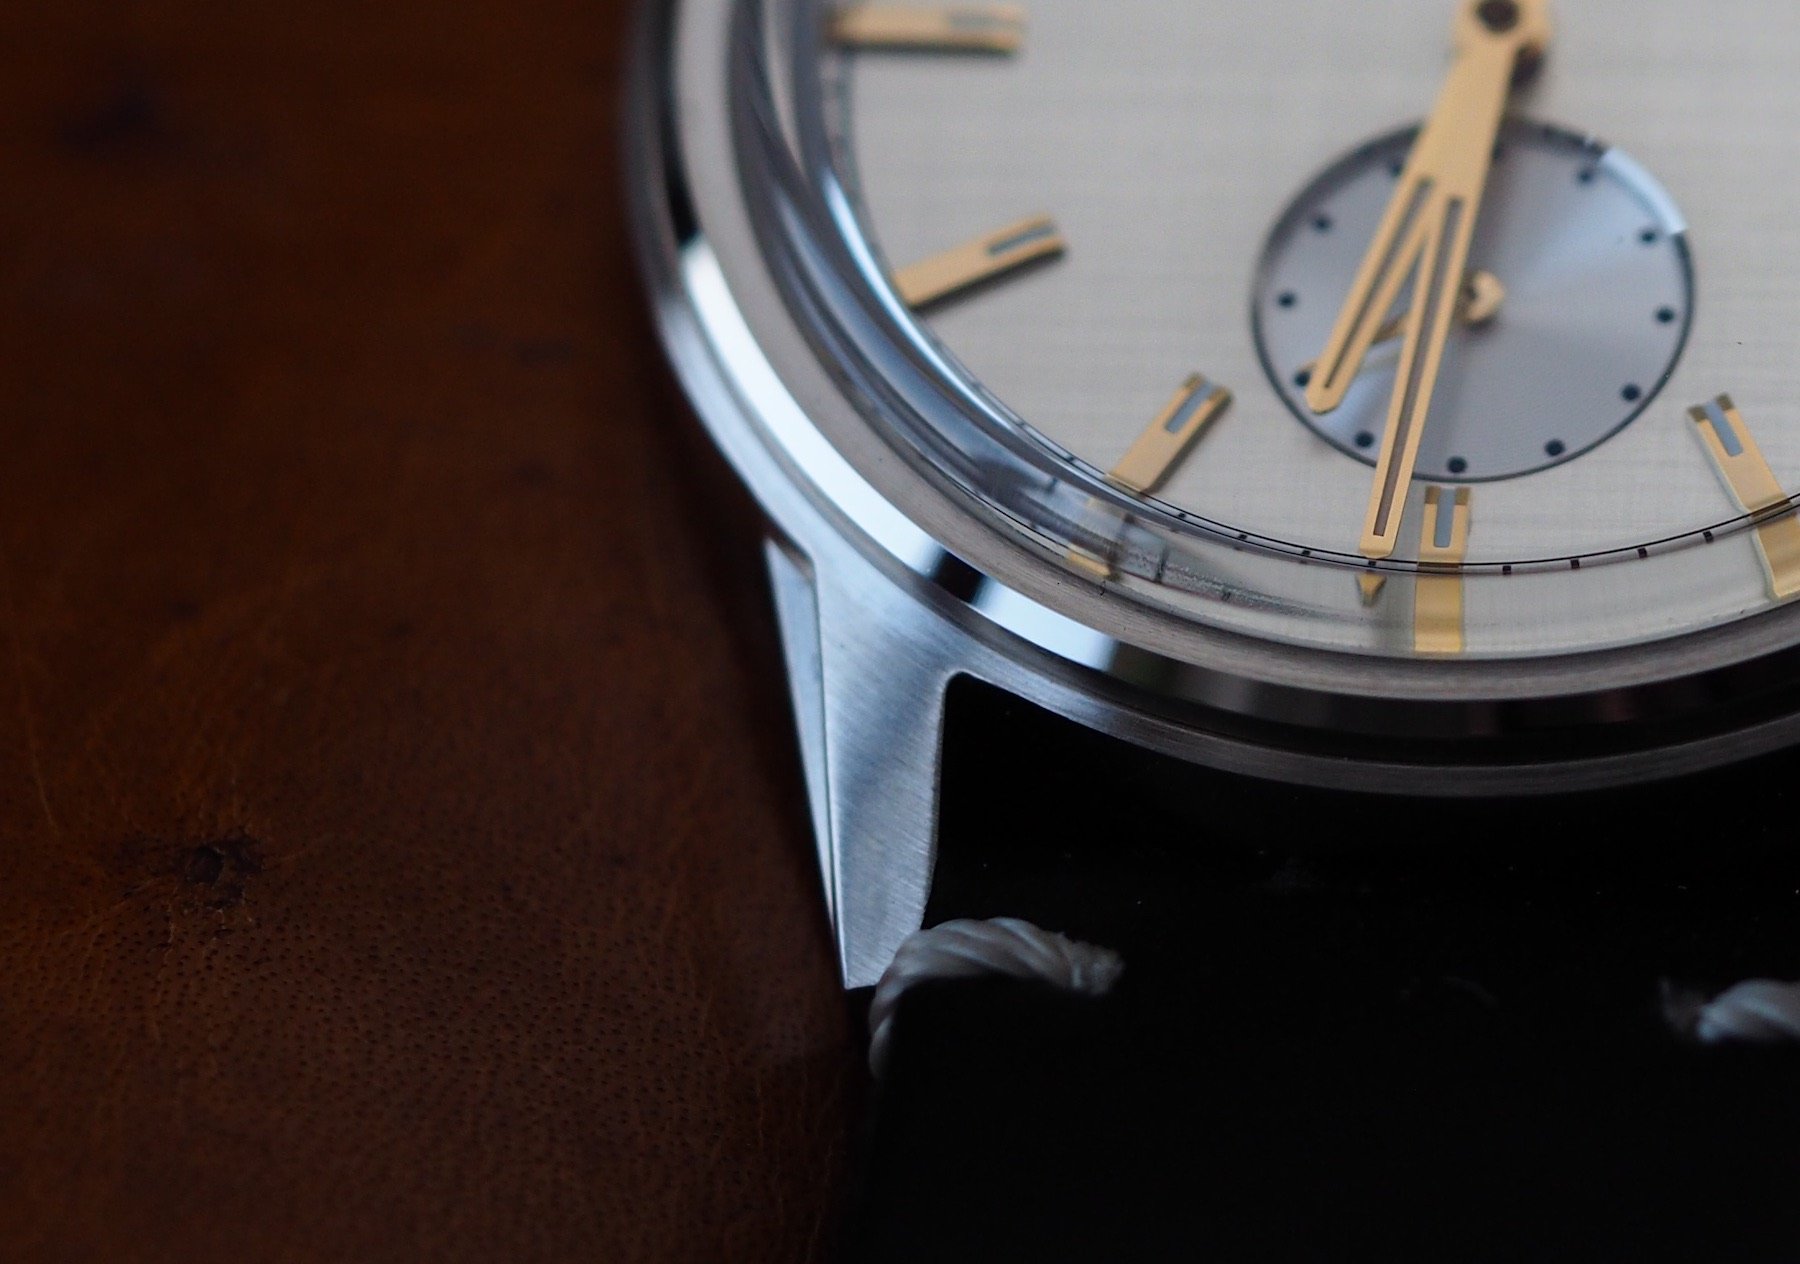 Hands-On Video: Two Affordable, Unisex Miró Watches - Worn & Wound